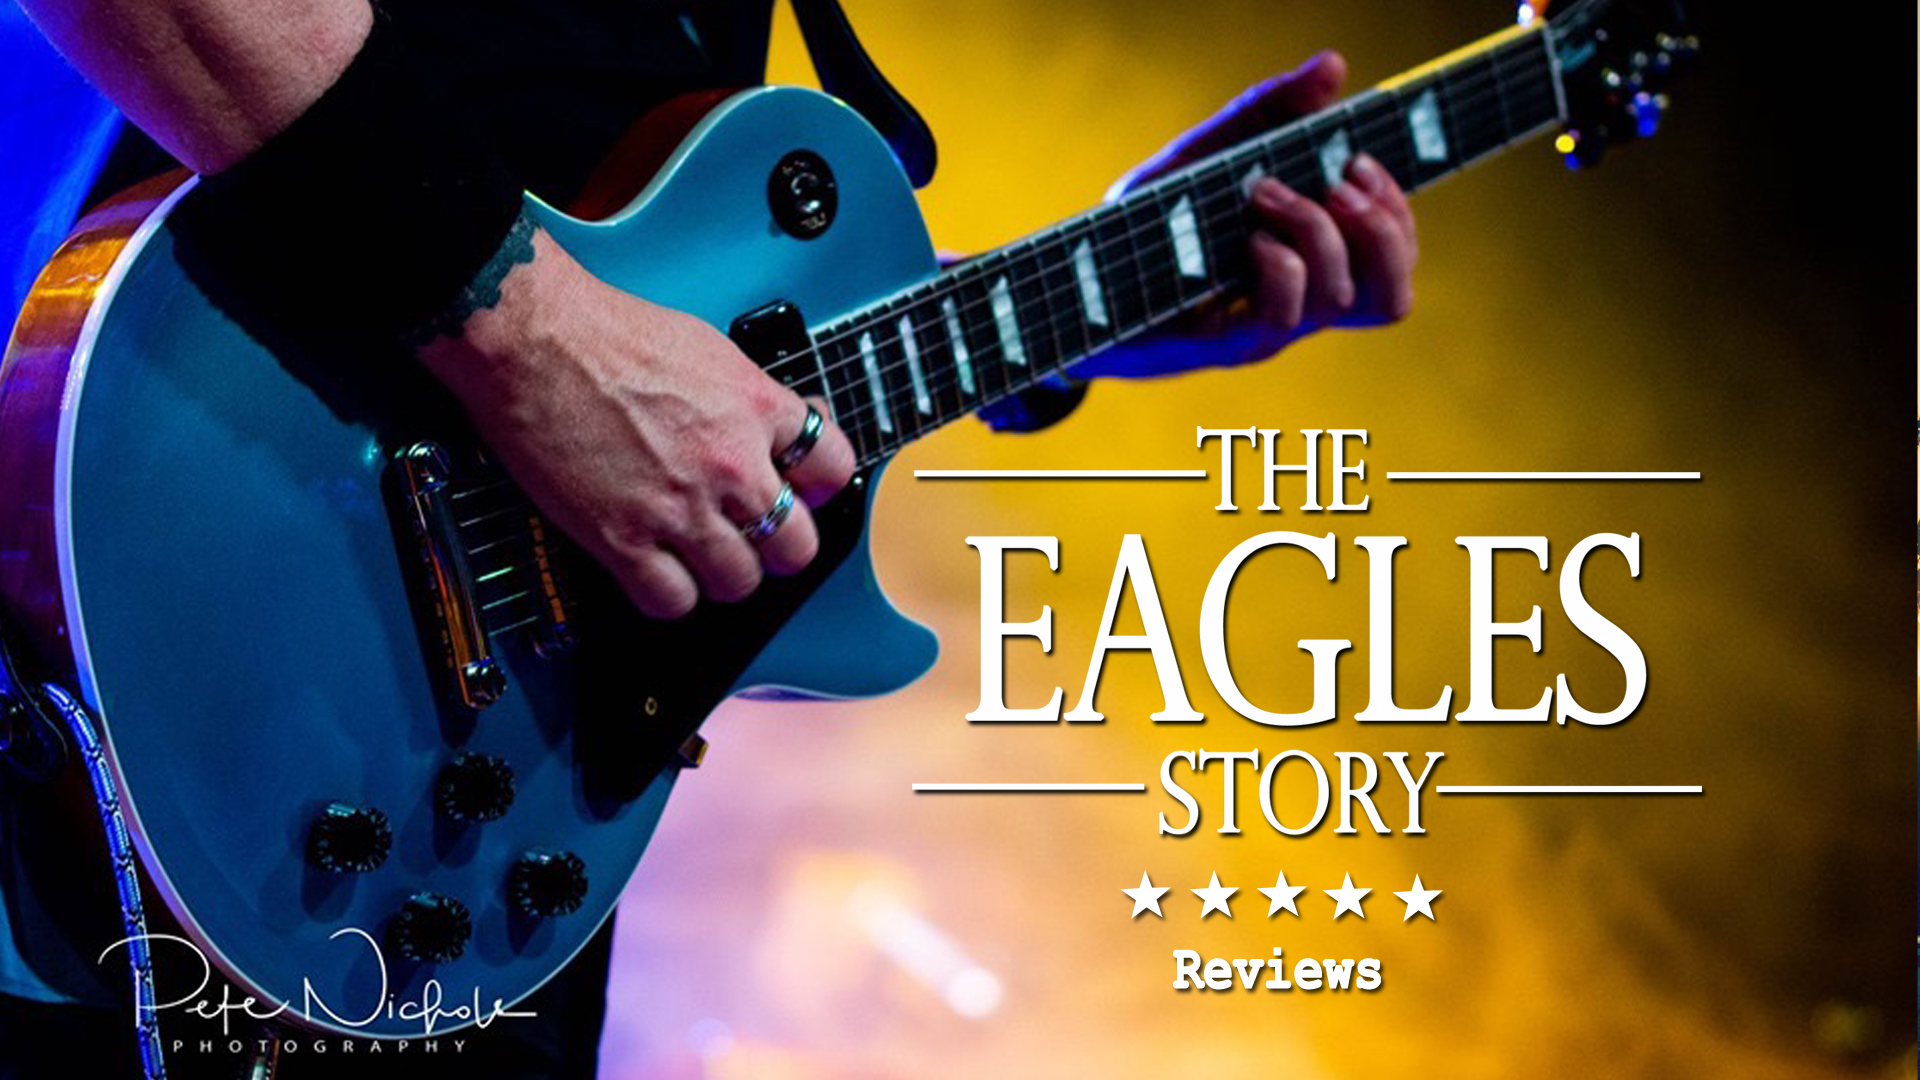 The Eagles Story